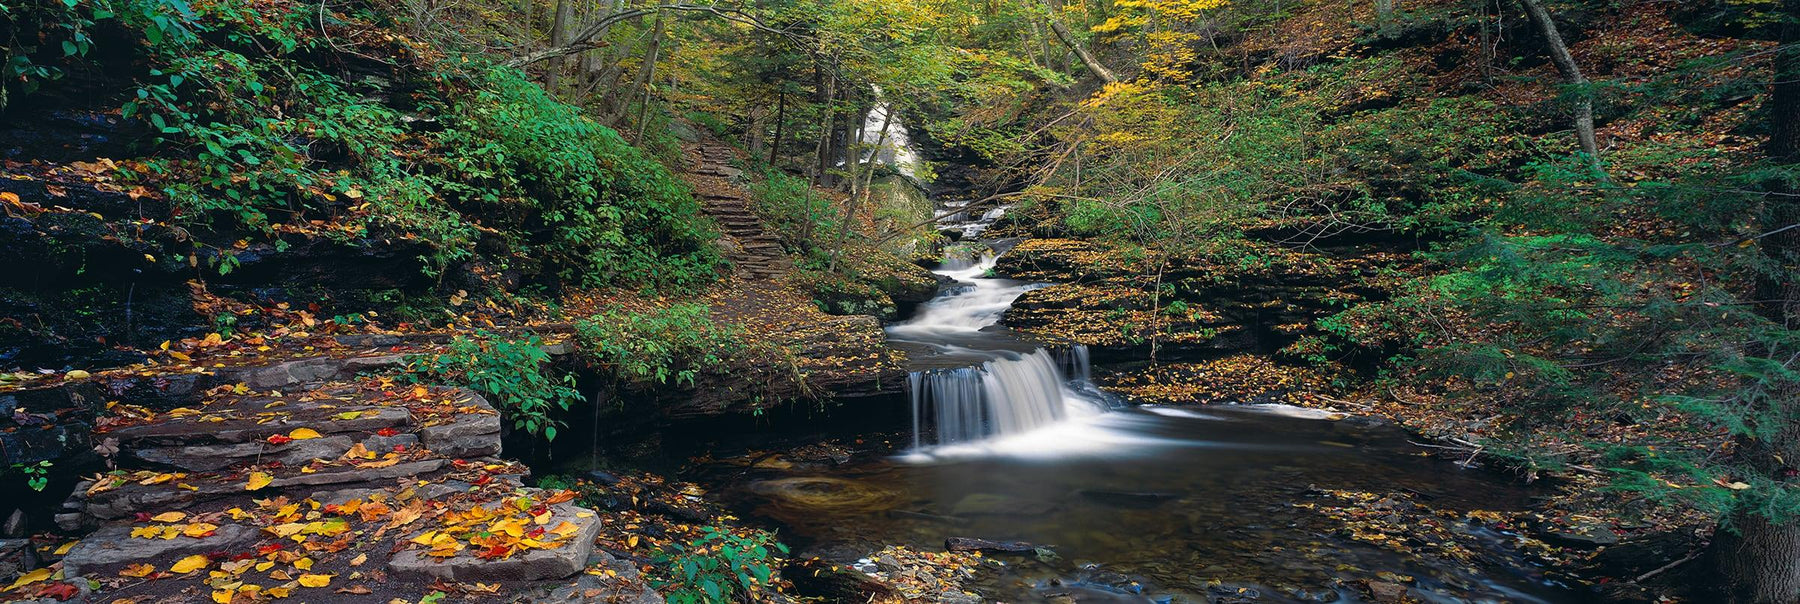 Leaf covered path in front of small waterfalls flowing into a black rock riverbed in Ricketts Glen State Park Pennsylvania